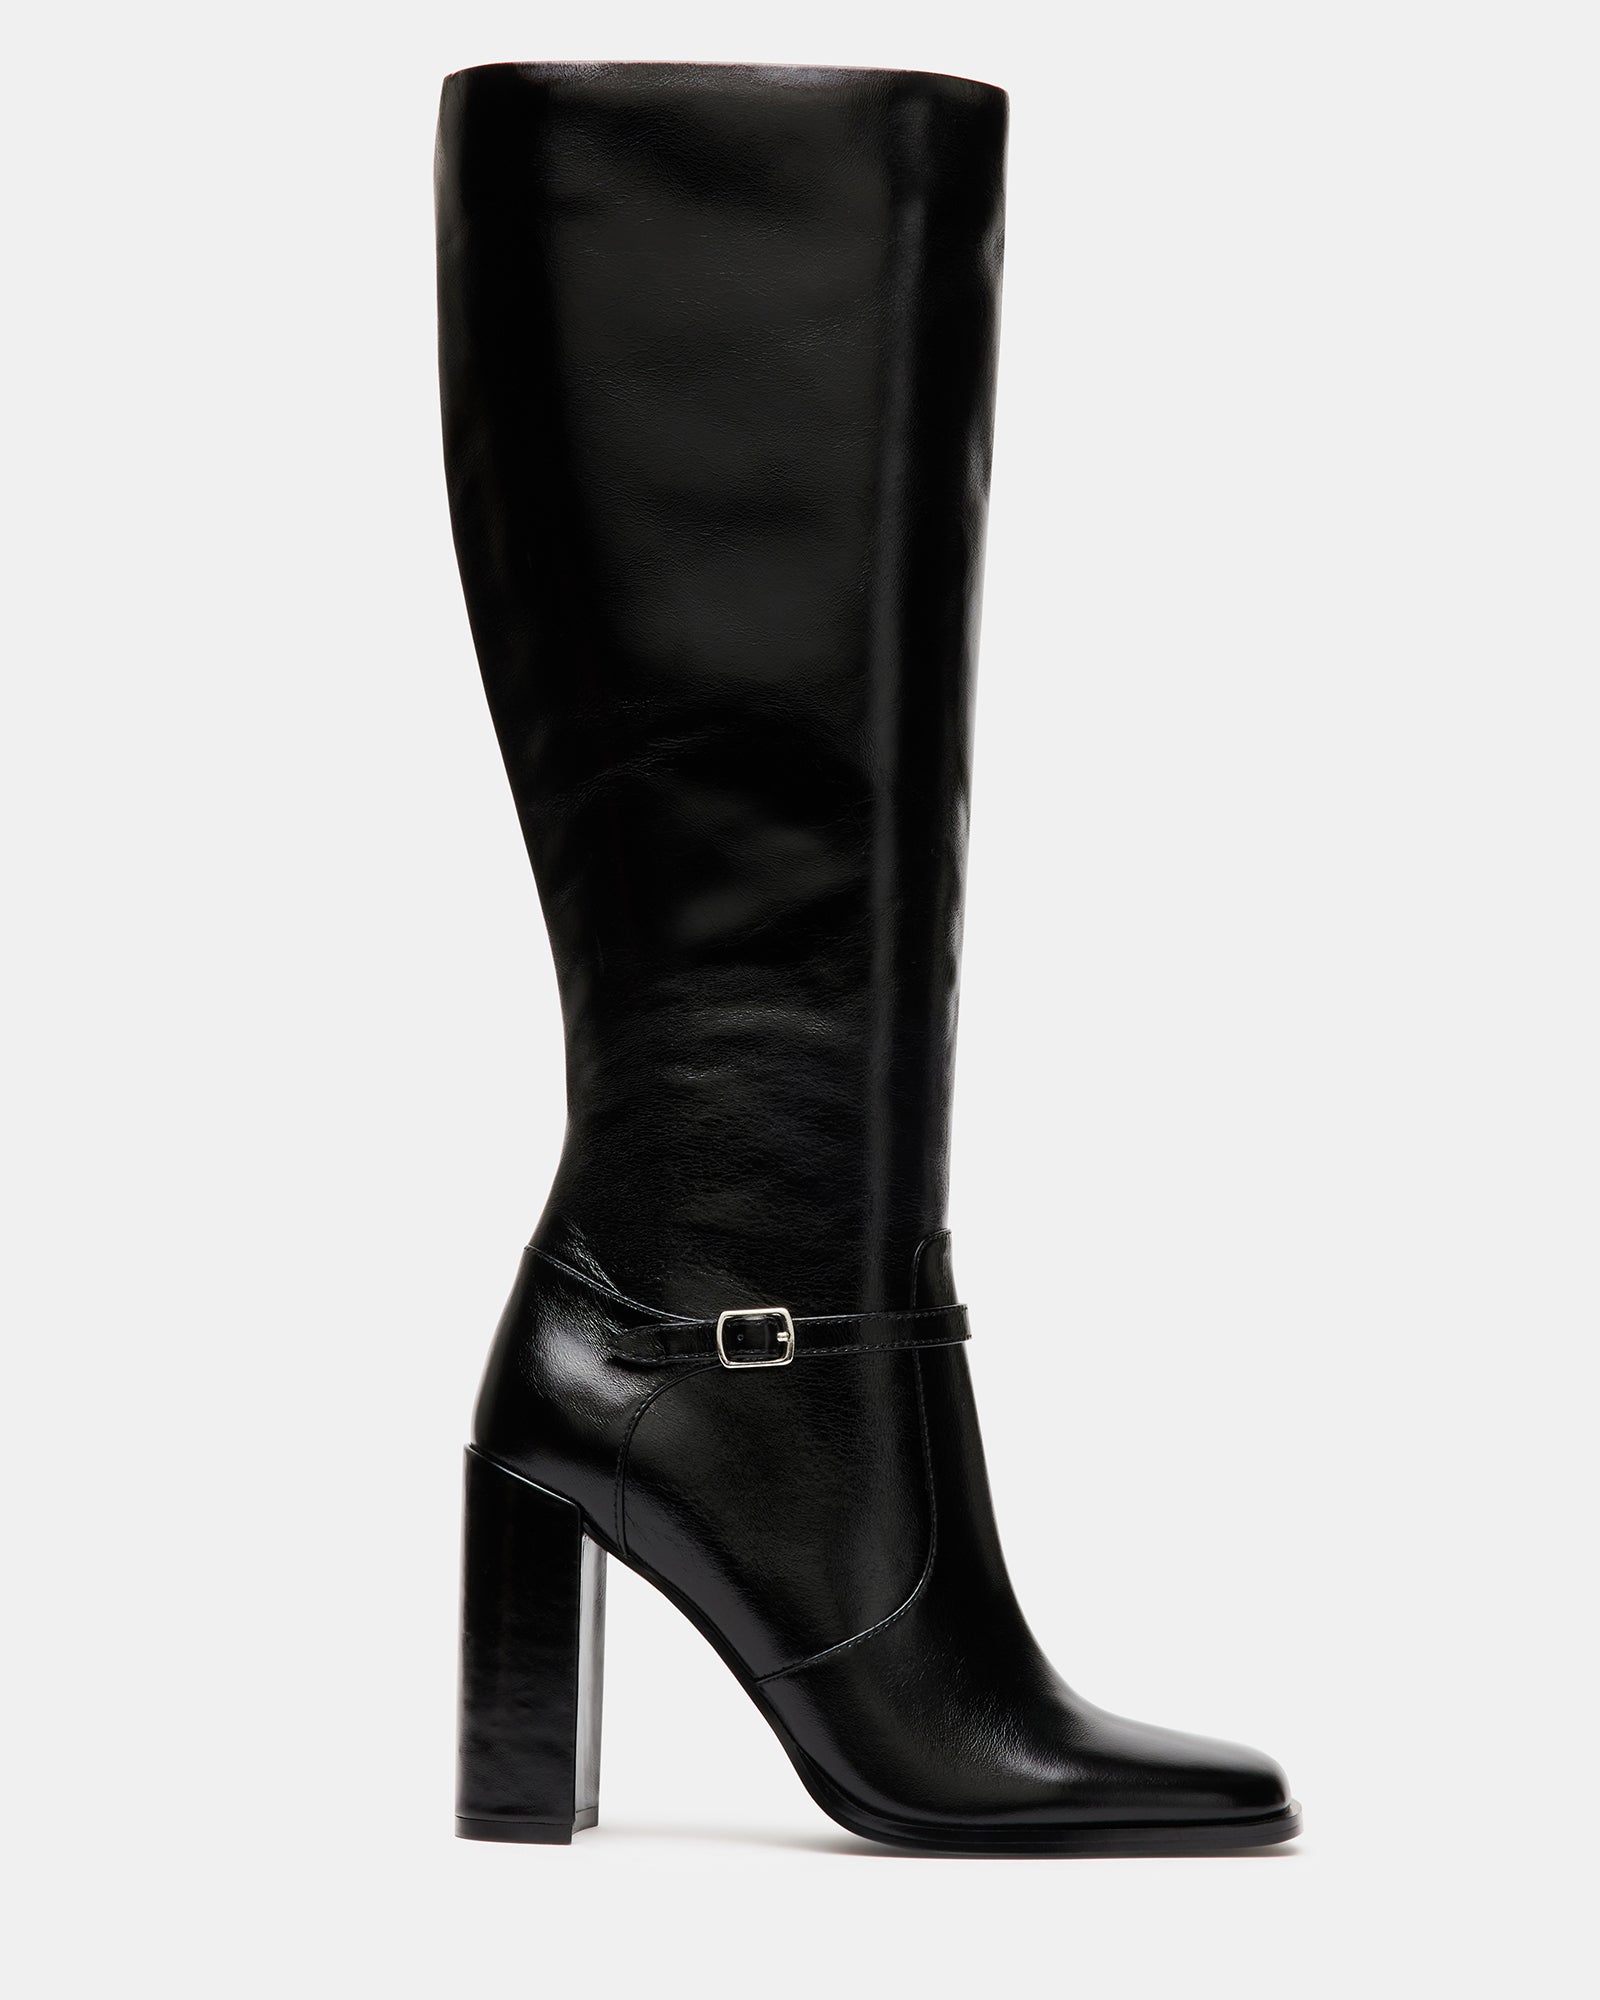 ADALYN Black Leather Knee High Square Toe Boot | Women's Boots – Steve ...